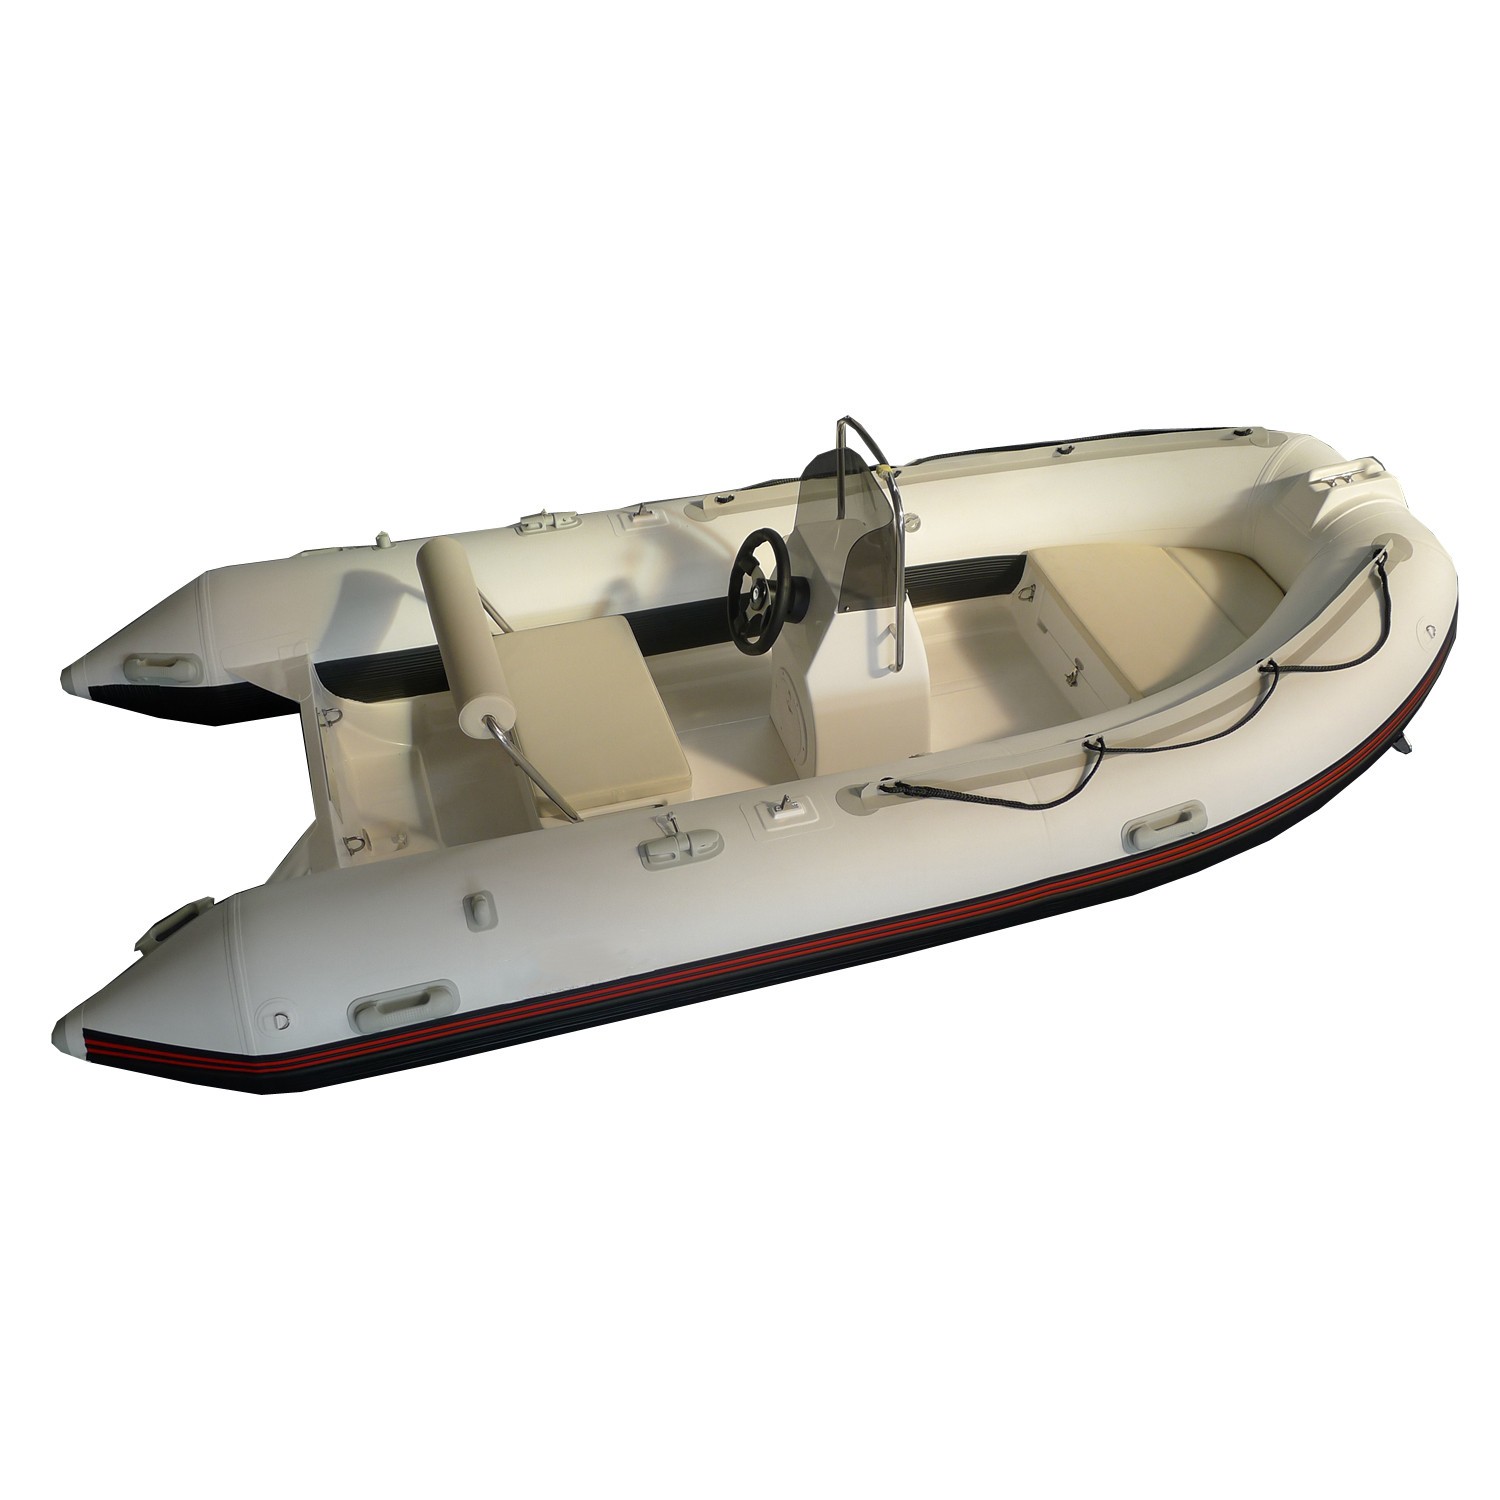 Fibreglass tender boats and 10 ft achilles inflatable boat for sale